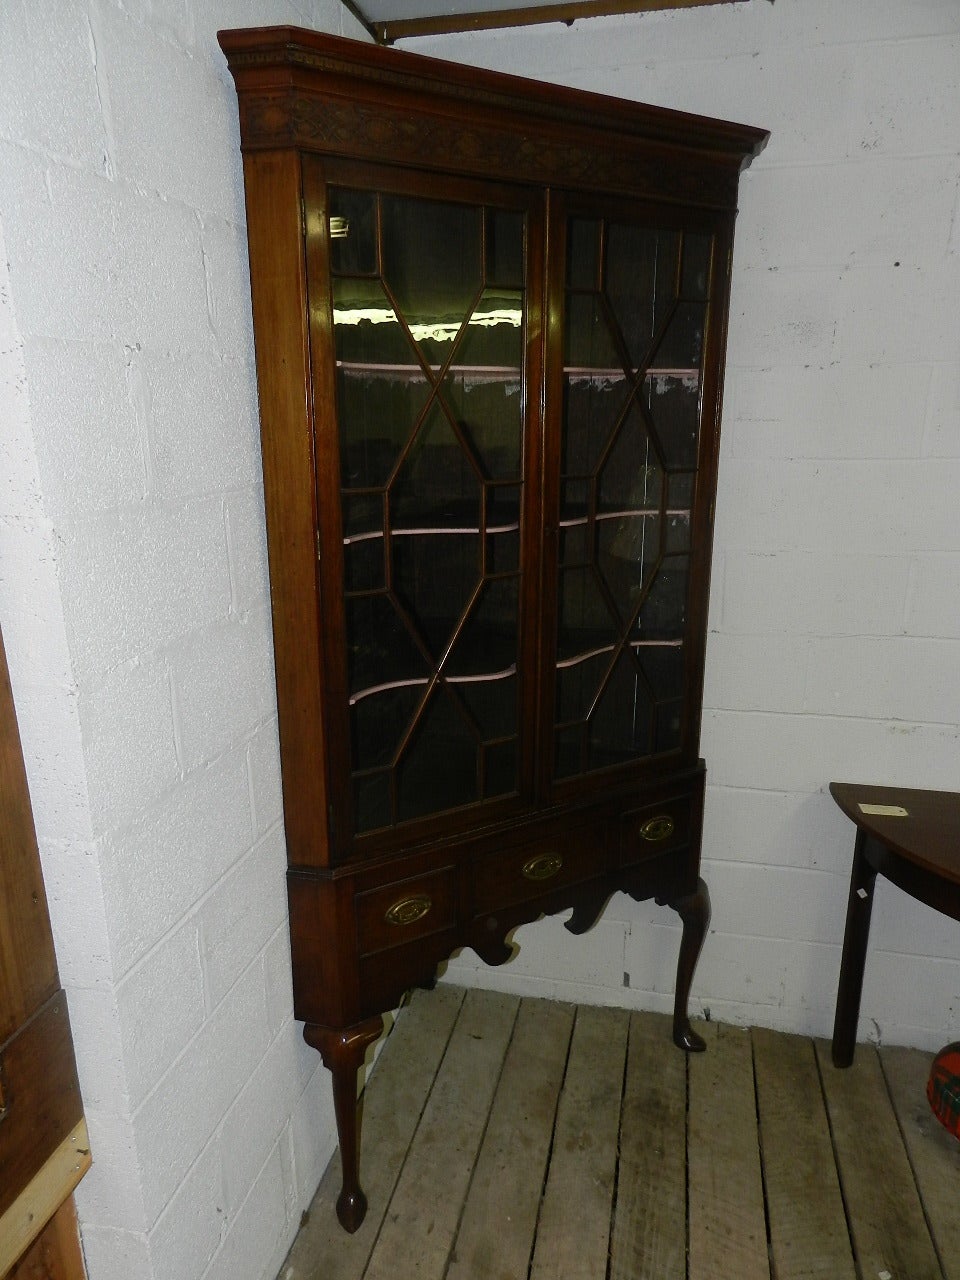 Mahogany corner cupboard .The upper section has a pair of 13 pane astragal glazed doors enclosing serpentine shaped shelves. The exterior has Chinese Chippendale style relief carving on the upper frieze. The lower section has a single opening drawer